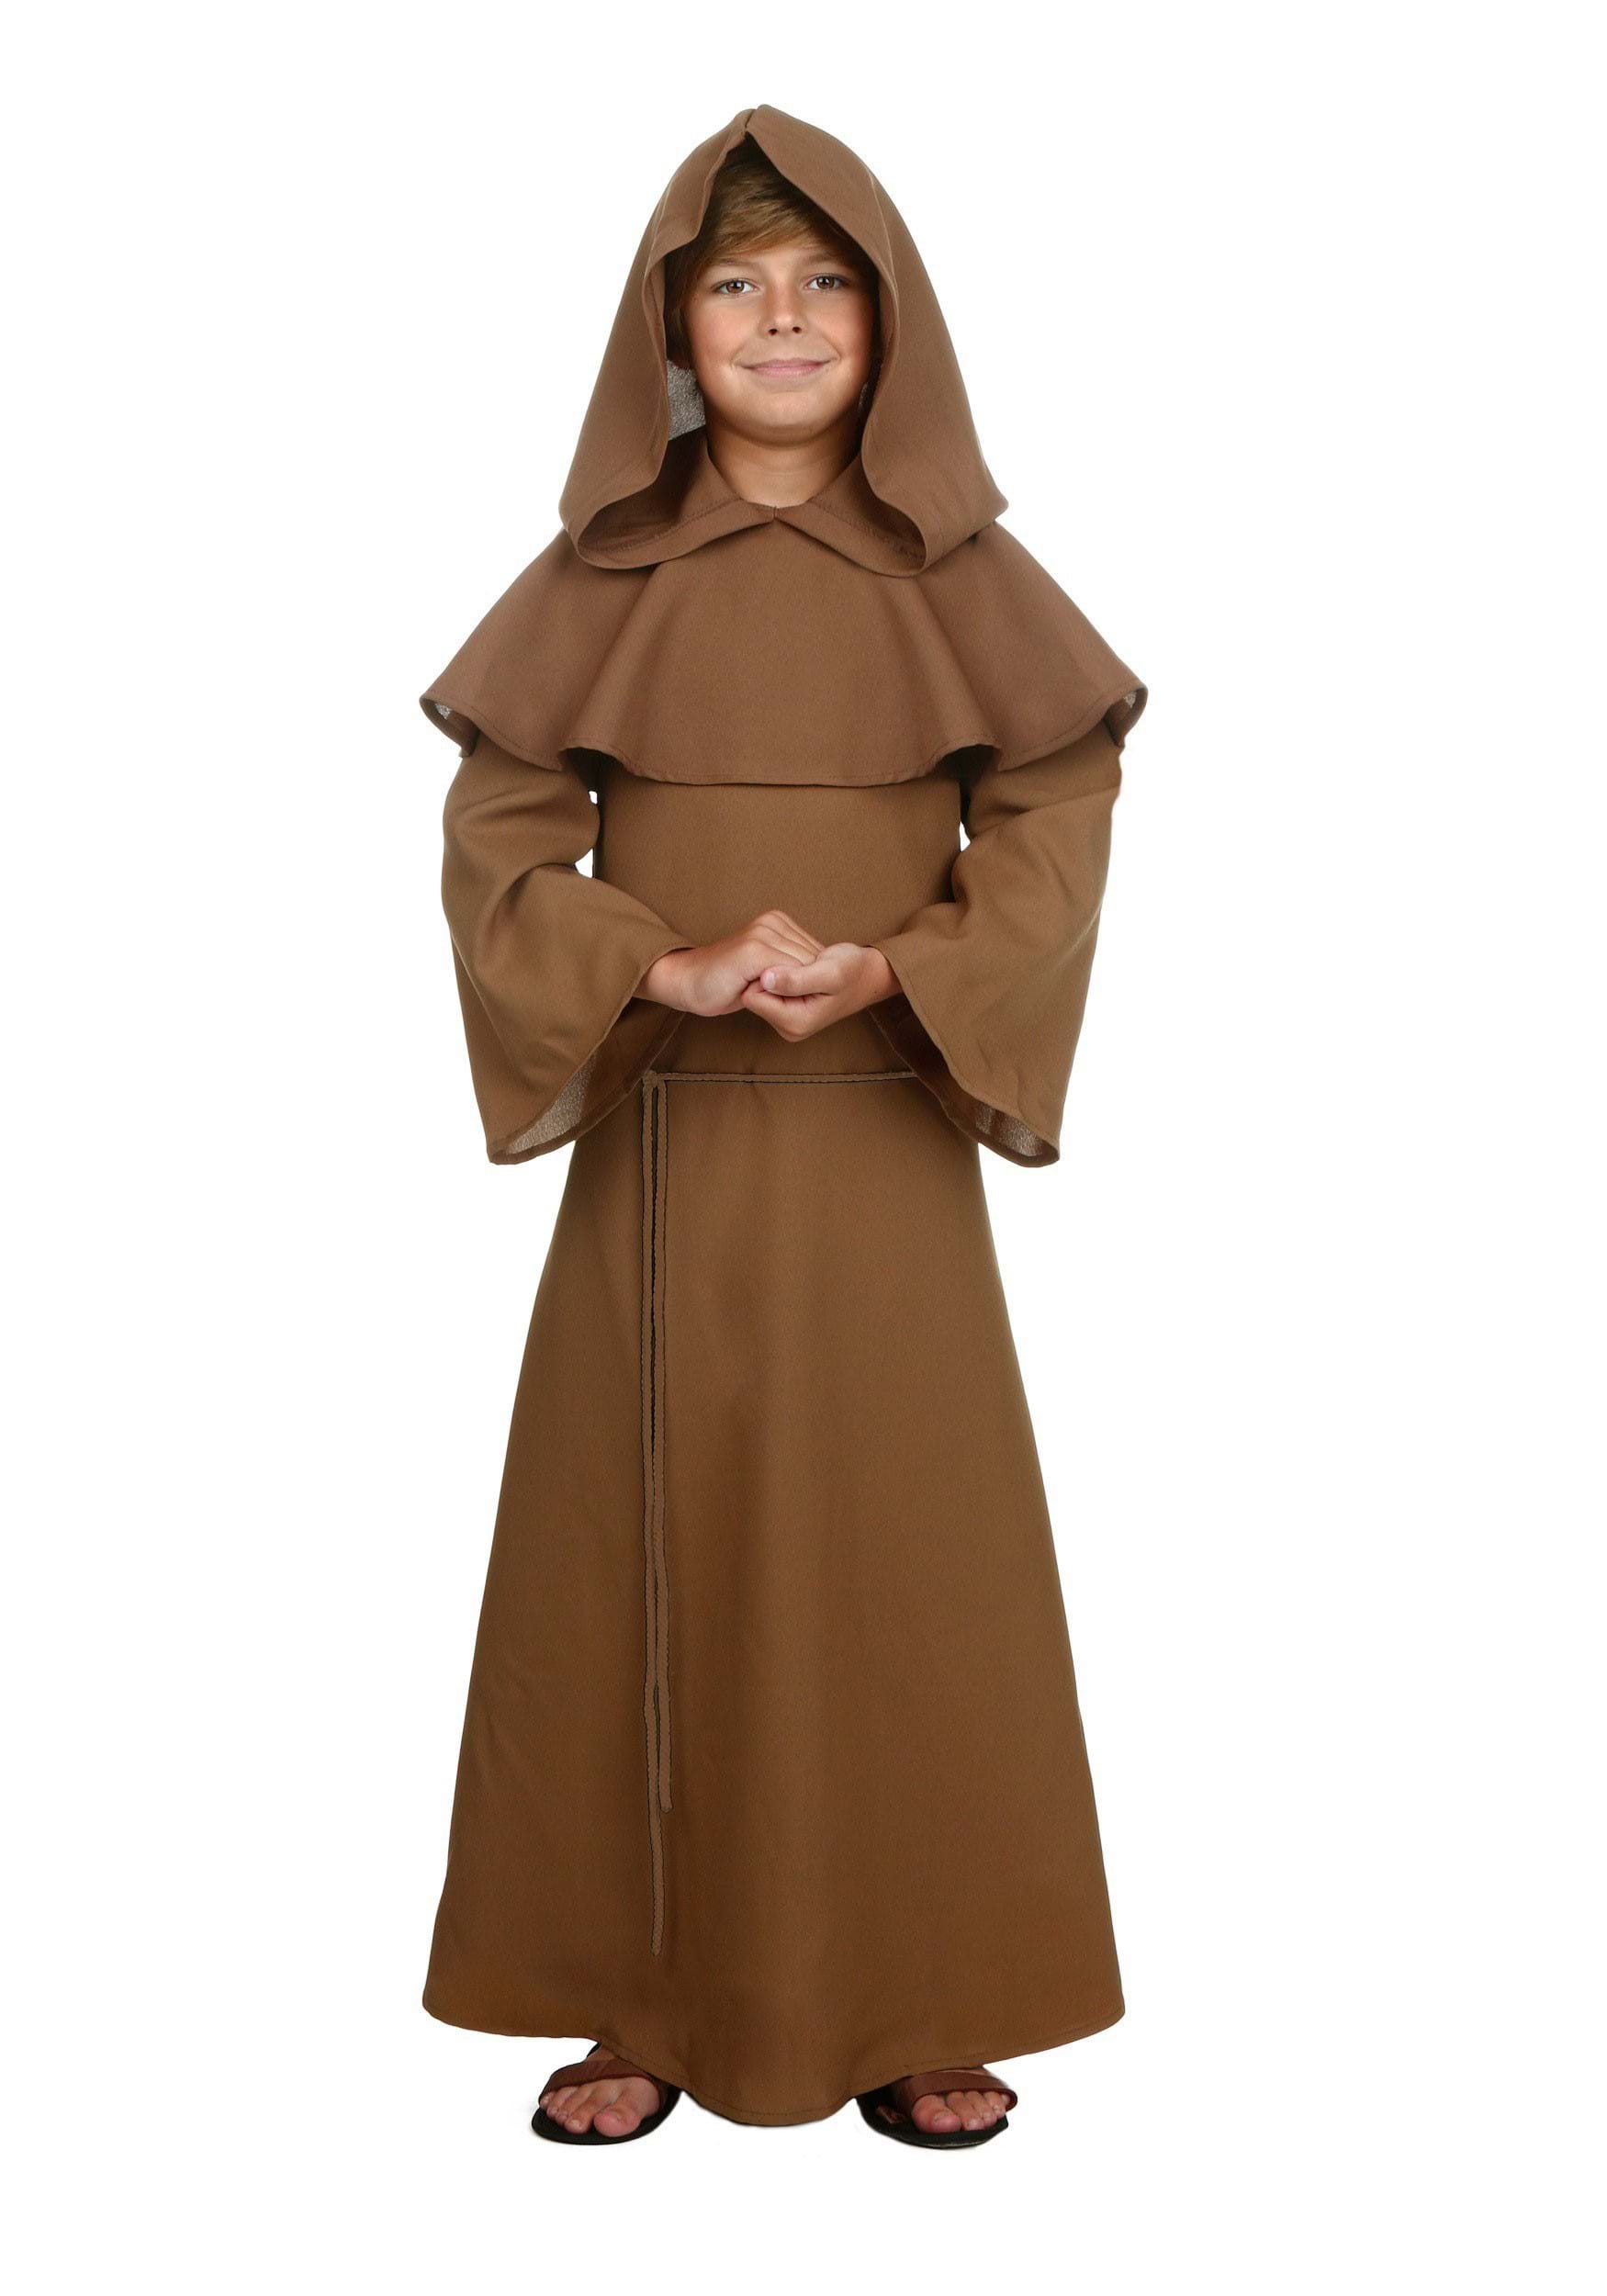 Photos - Fancy Dress ROBE FUN Costumes Brown Monk  Costume for Kids | Religious Costumes Brown F 